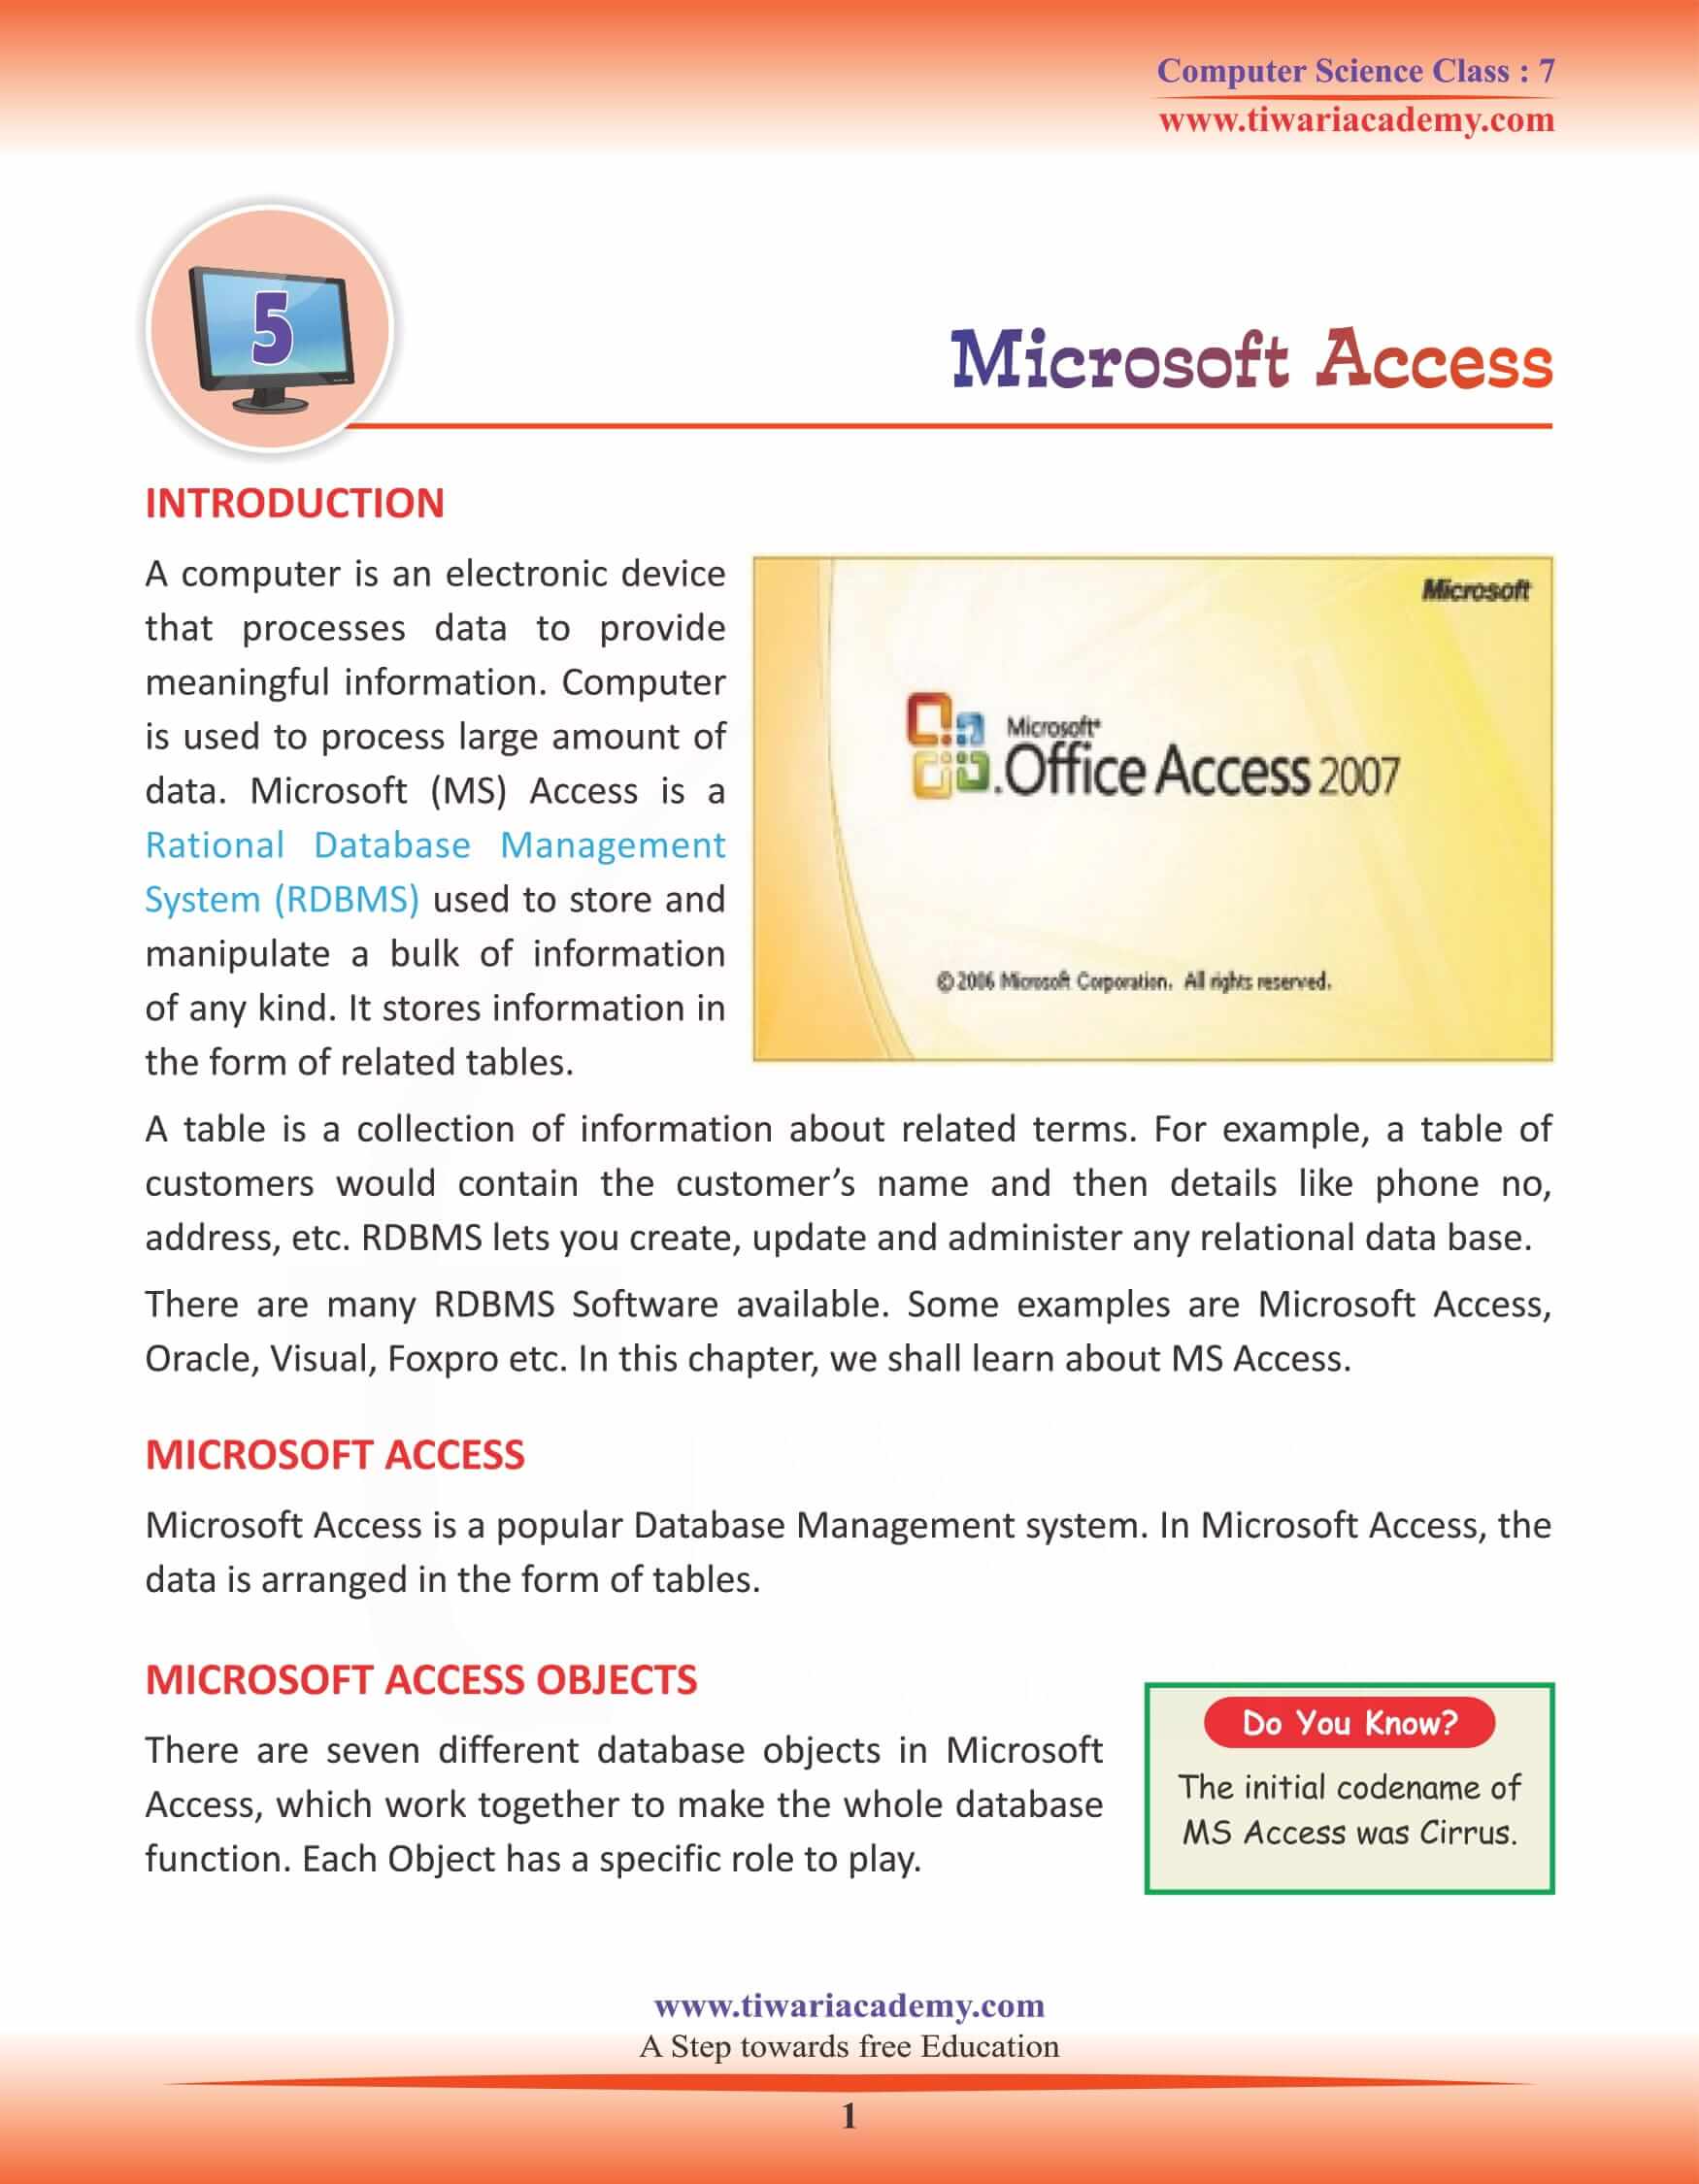 Class 7 Computer Science Chapter 5 Microsoft Access